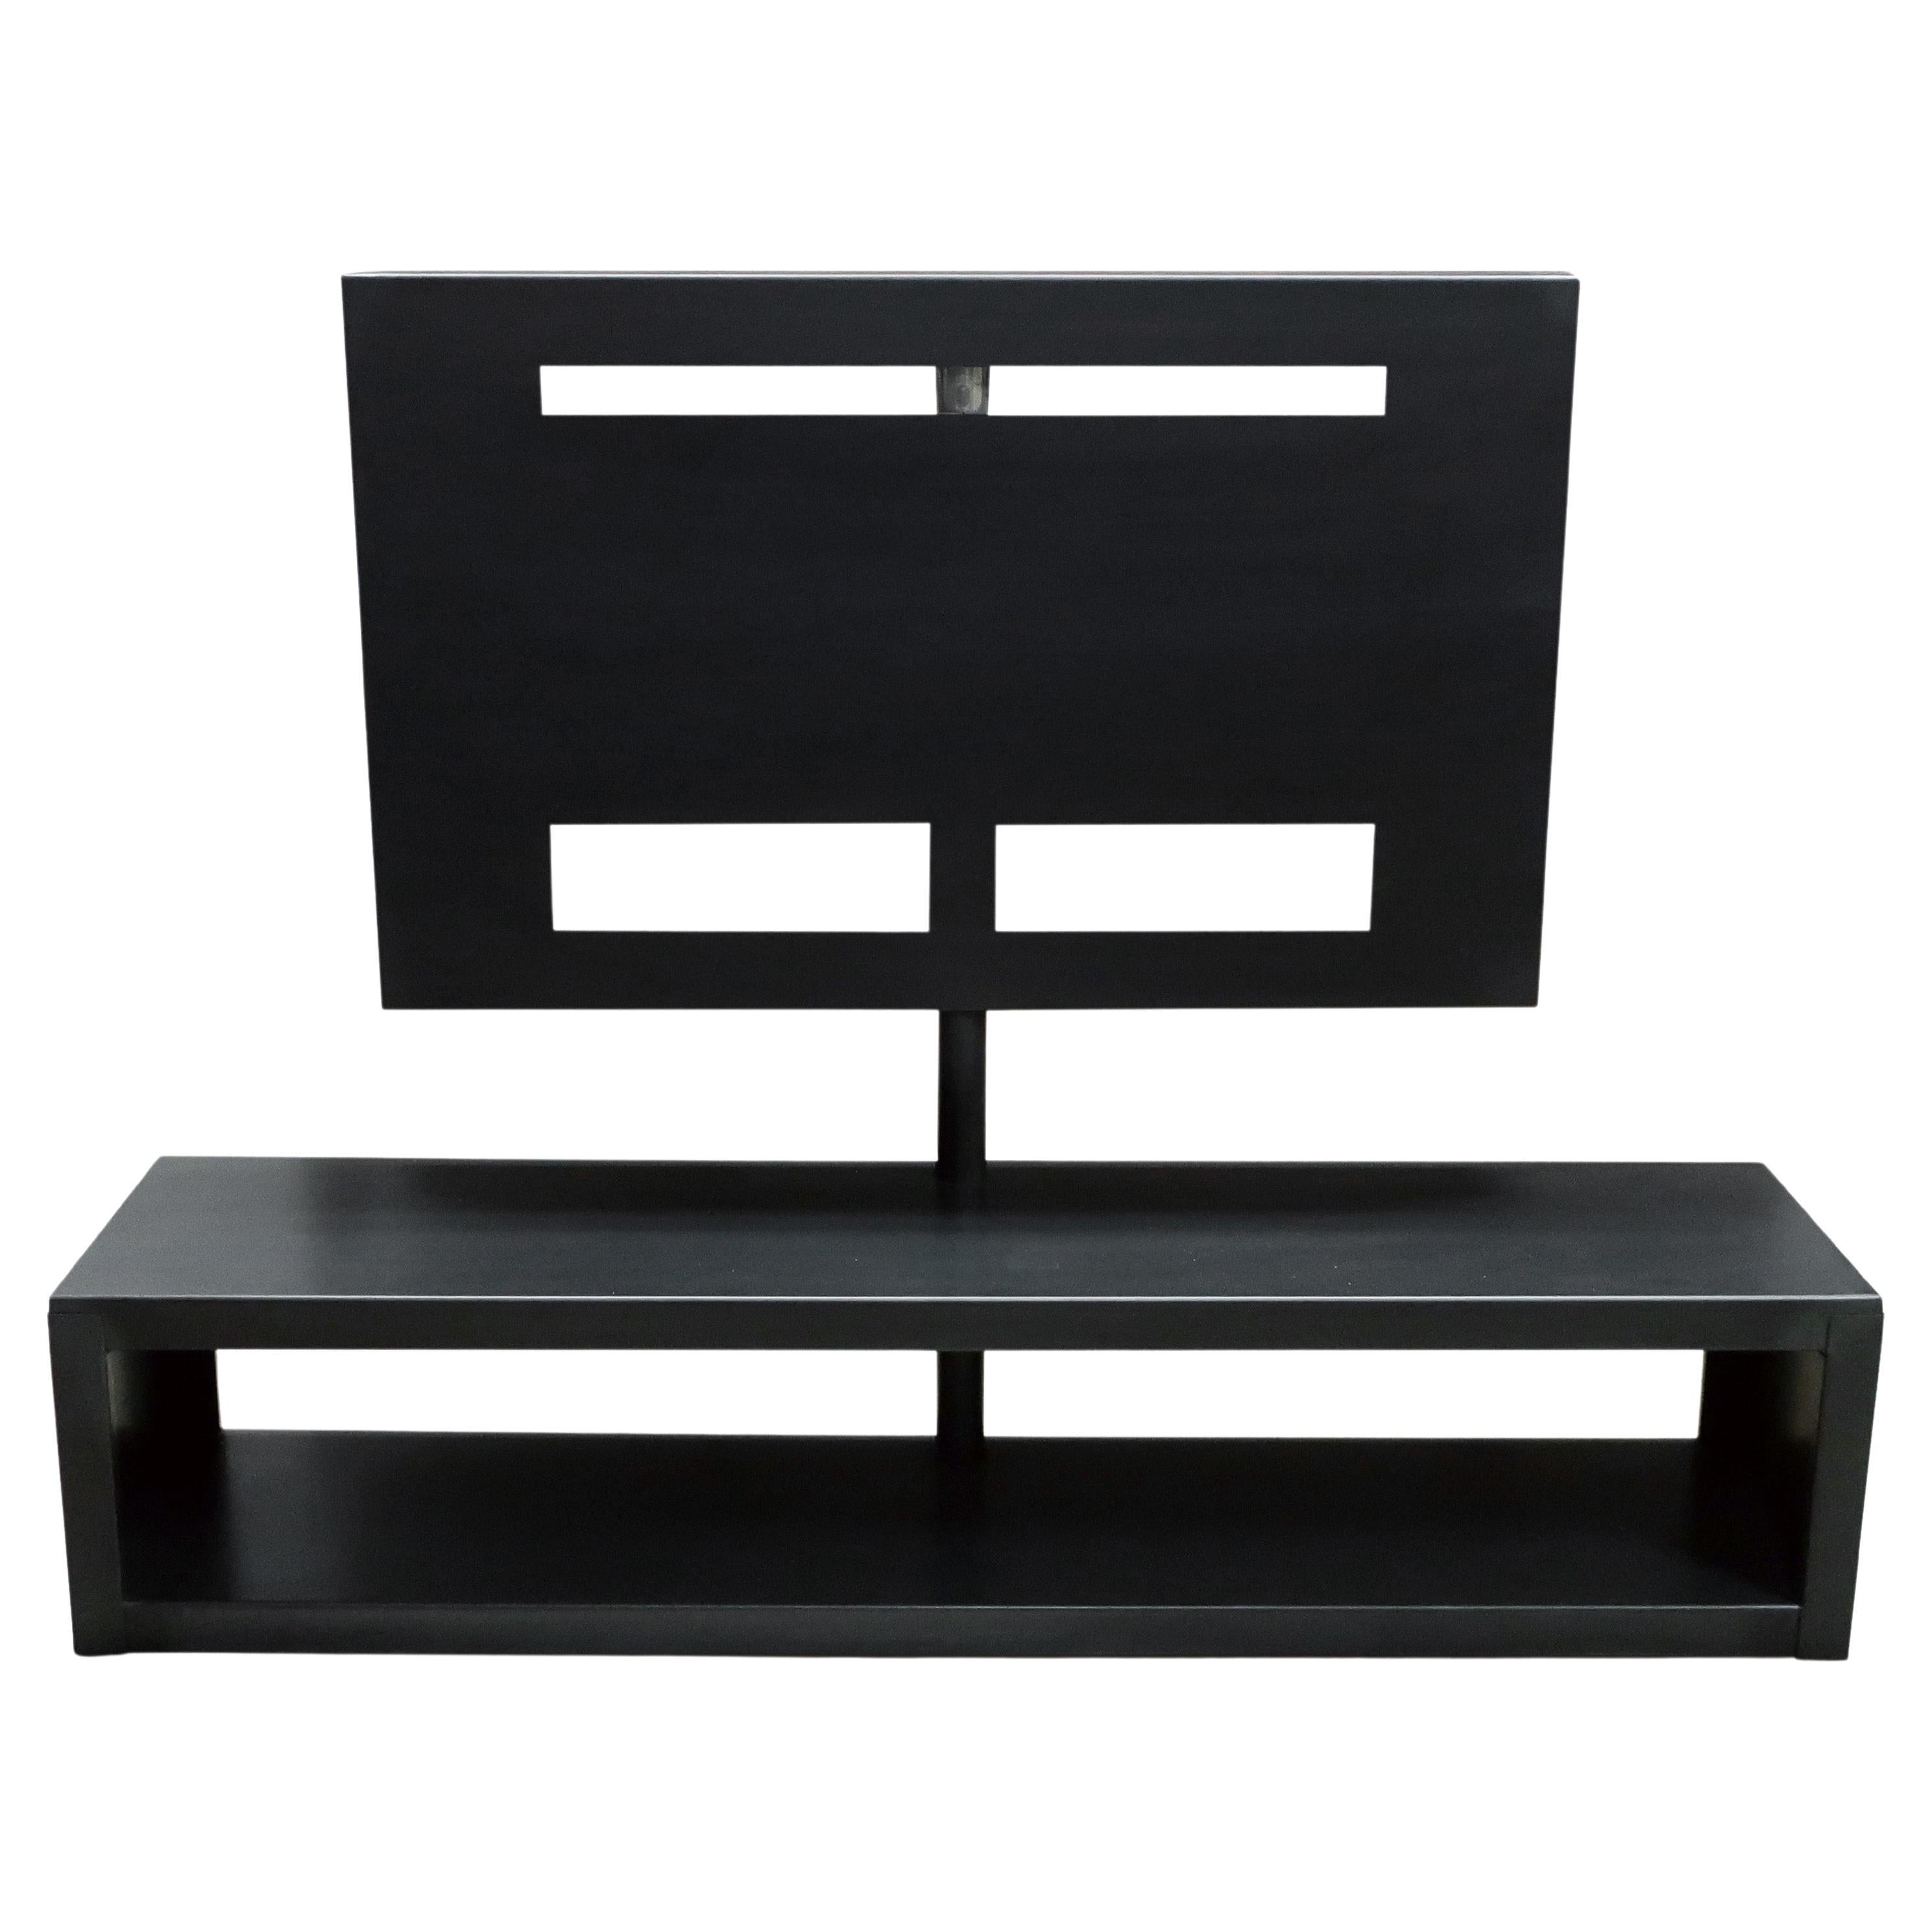 Big Irony Tv Stand and Console by Maurizio Peregalli for Zeus